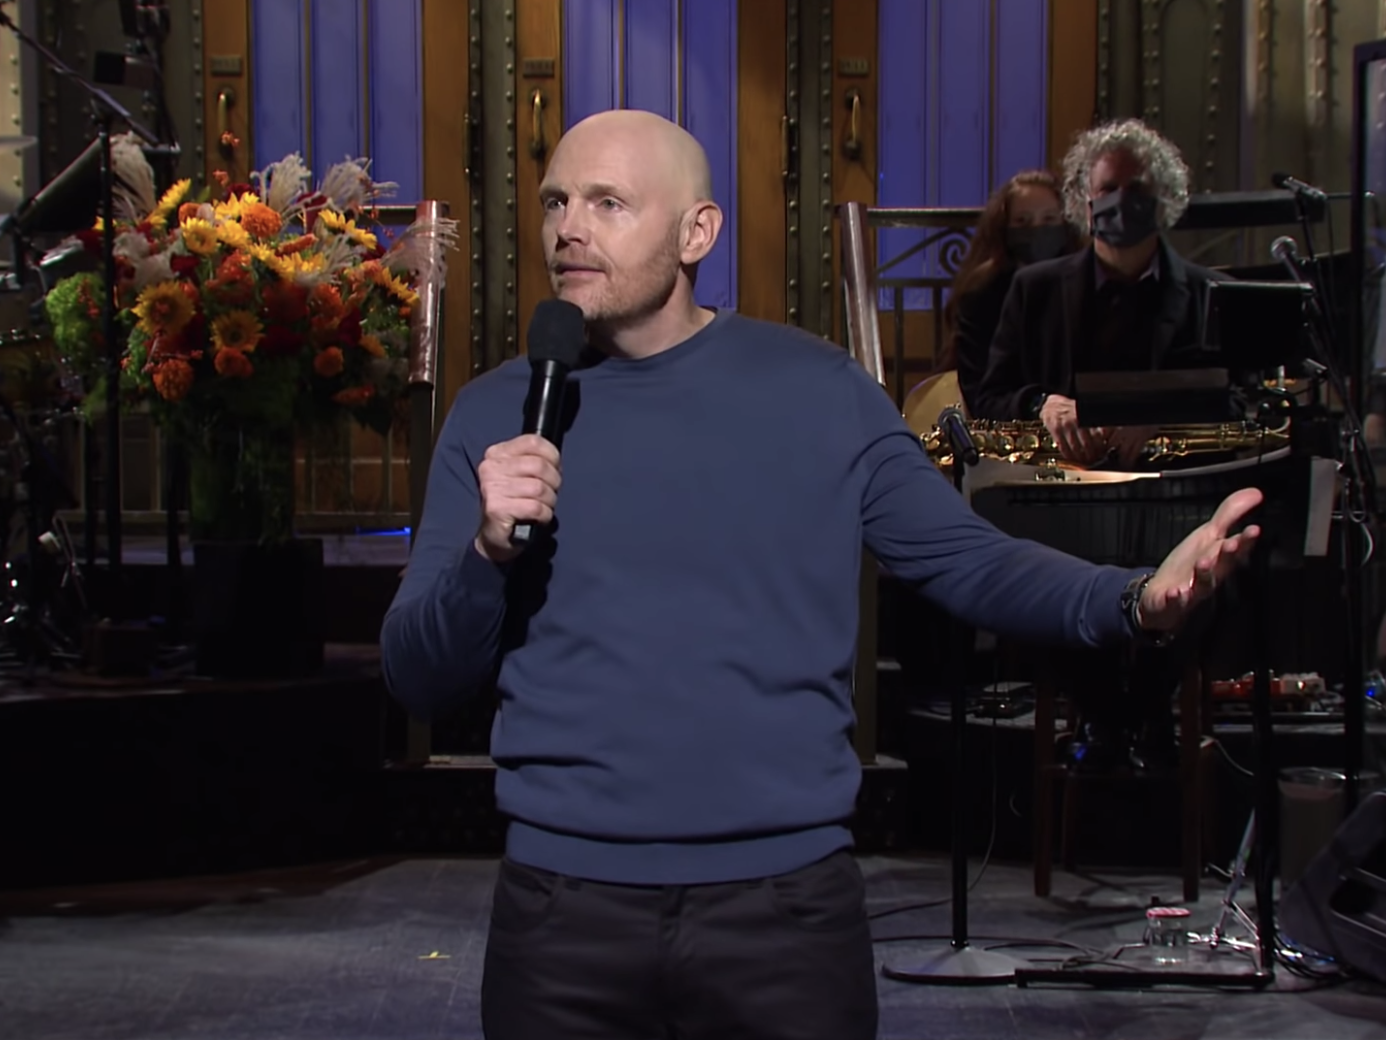 Viewers had mixed reactions to Bill Burr's controversial "Saturday Night Live" monologue.